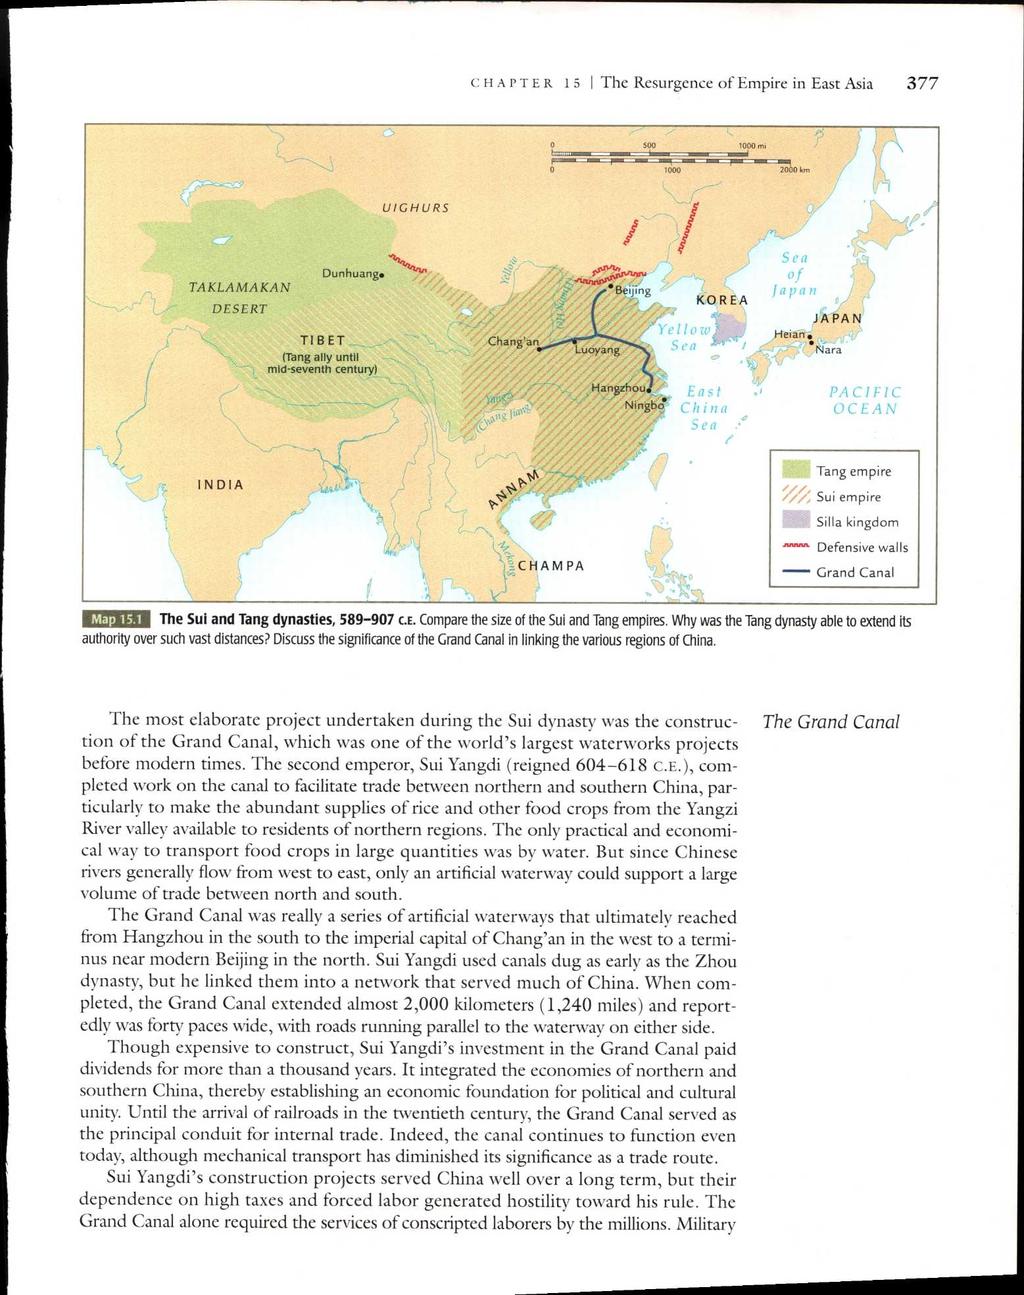 CHAPTER 15 I The Resurgence of Empire in East Asia 377 500 1000 mi 1000 2 UIGHURS TAKLAMAKAN DESERT Dunhuang BeJing TIBET Chang'an Luoyang (Tang ally until mid-seventh century) 77/ 7 // //,Hangzhou